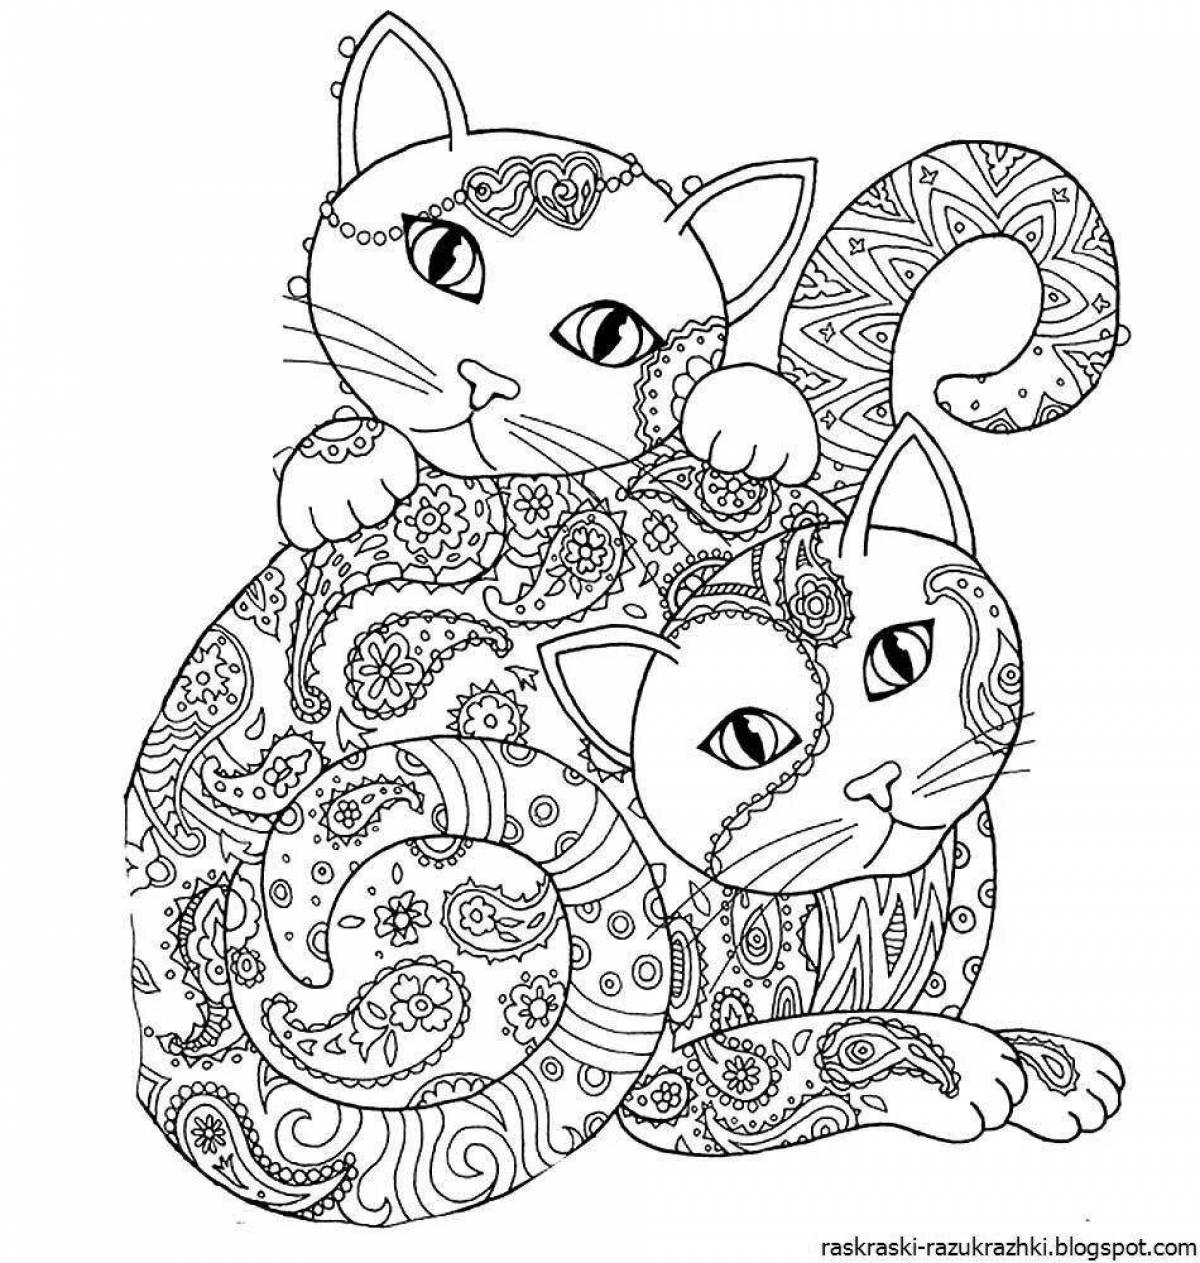 Coloring pages for girls 12 years old - cats